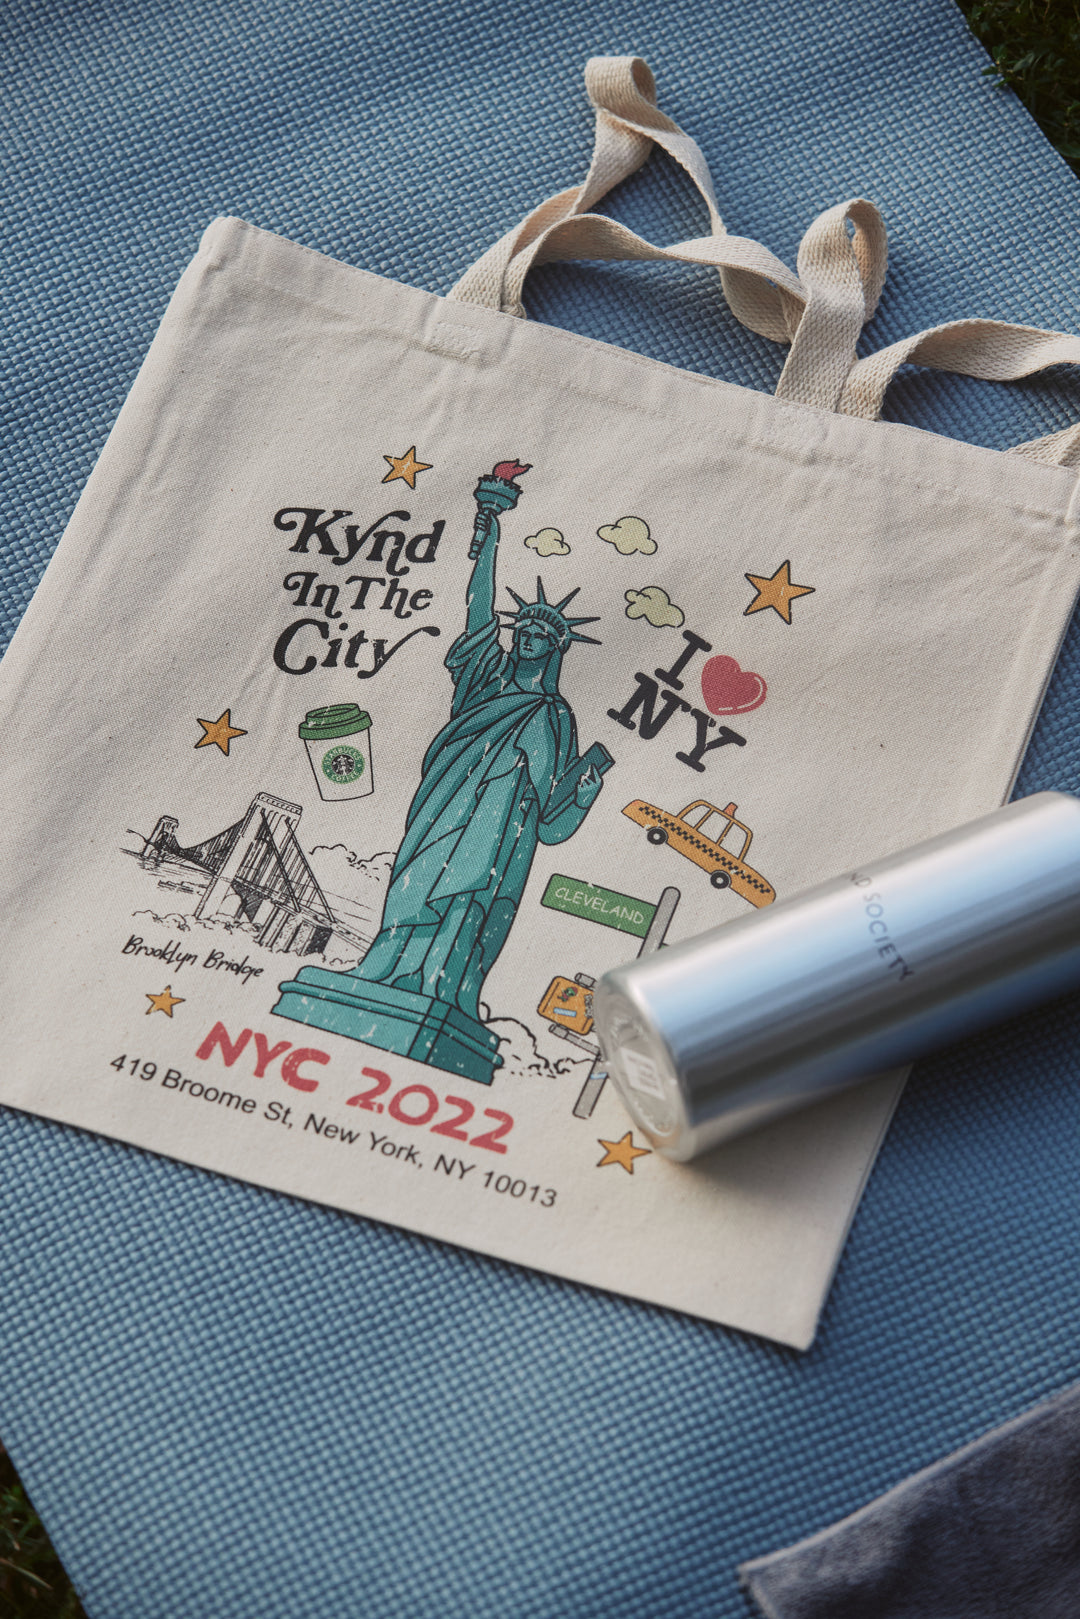 Kynd in The City Tote Bag